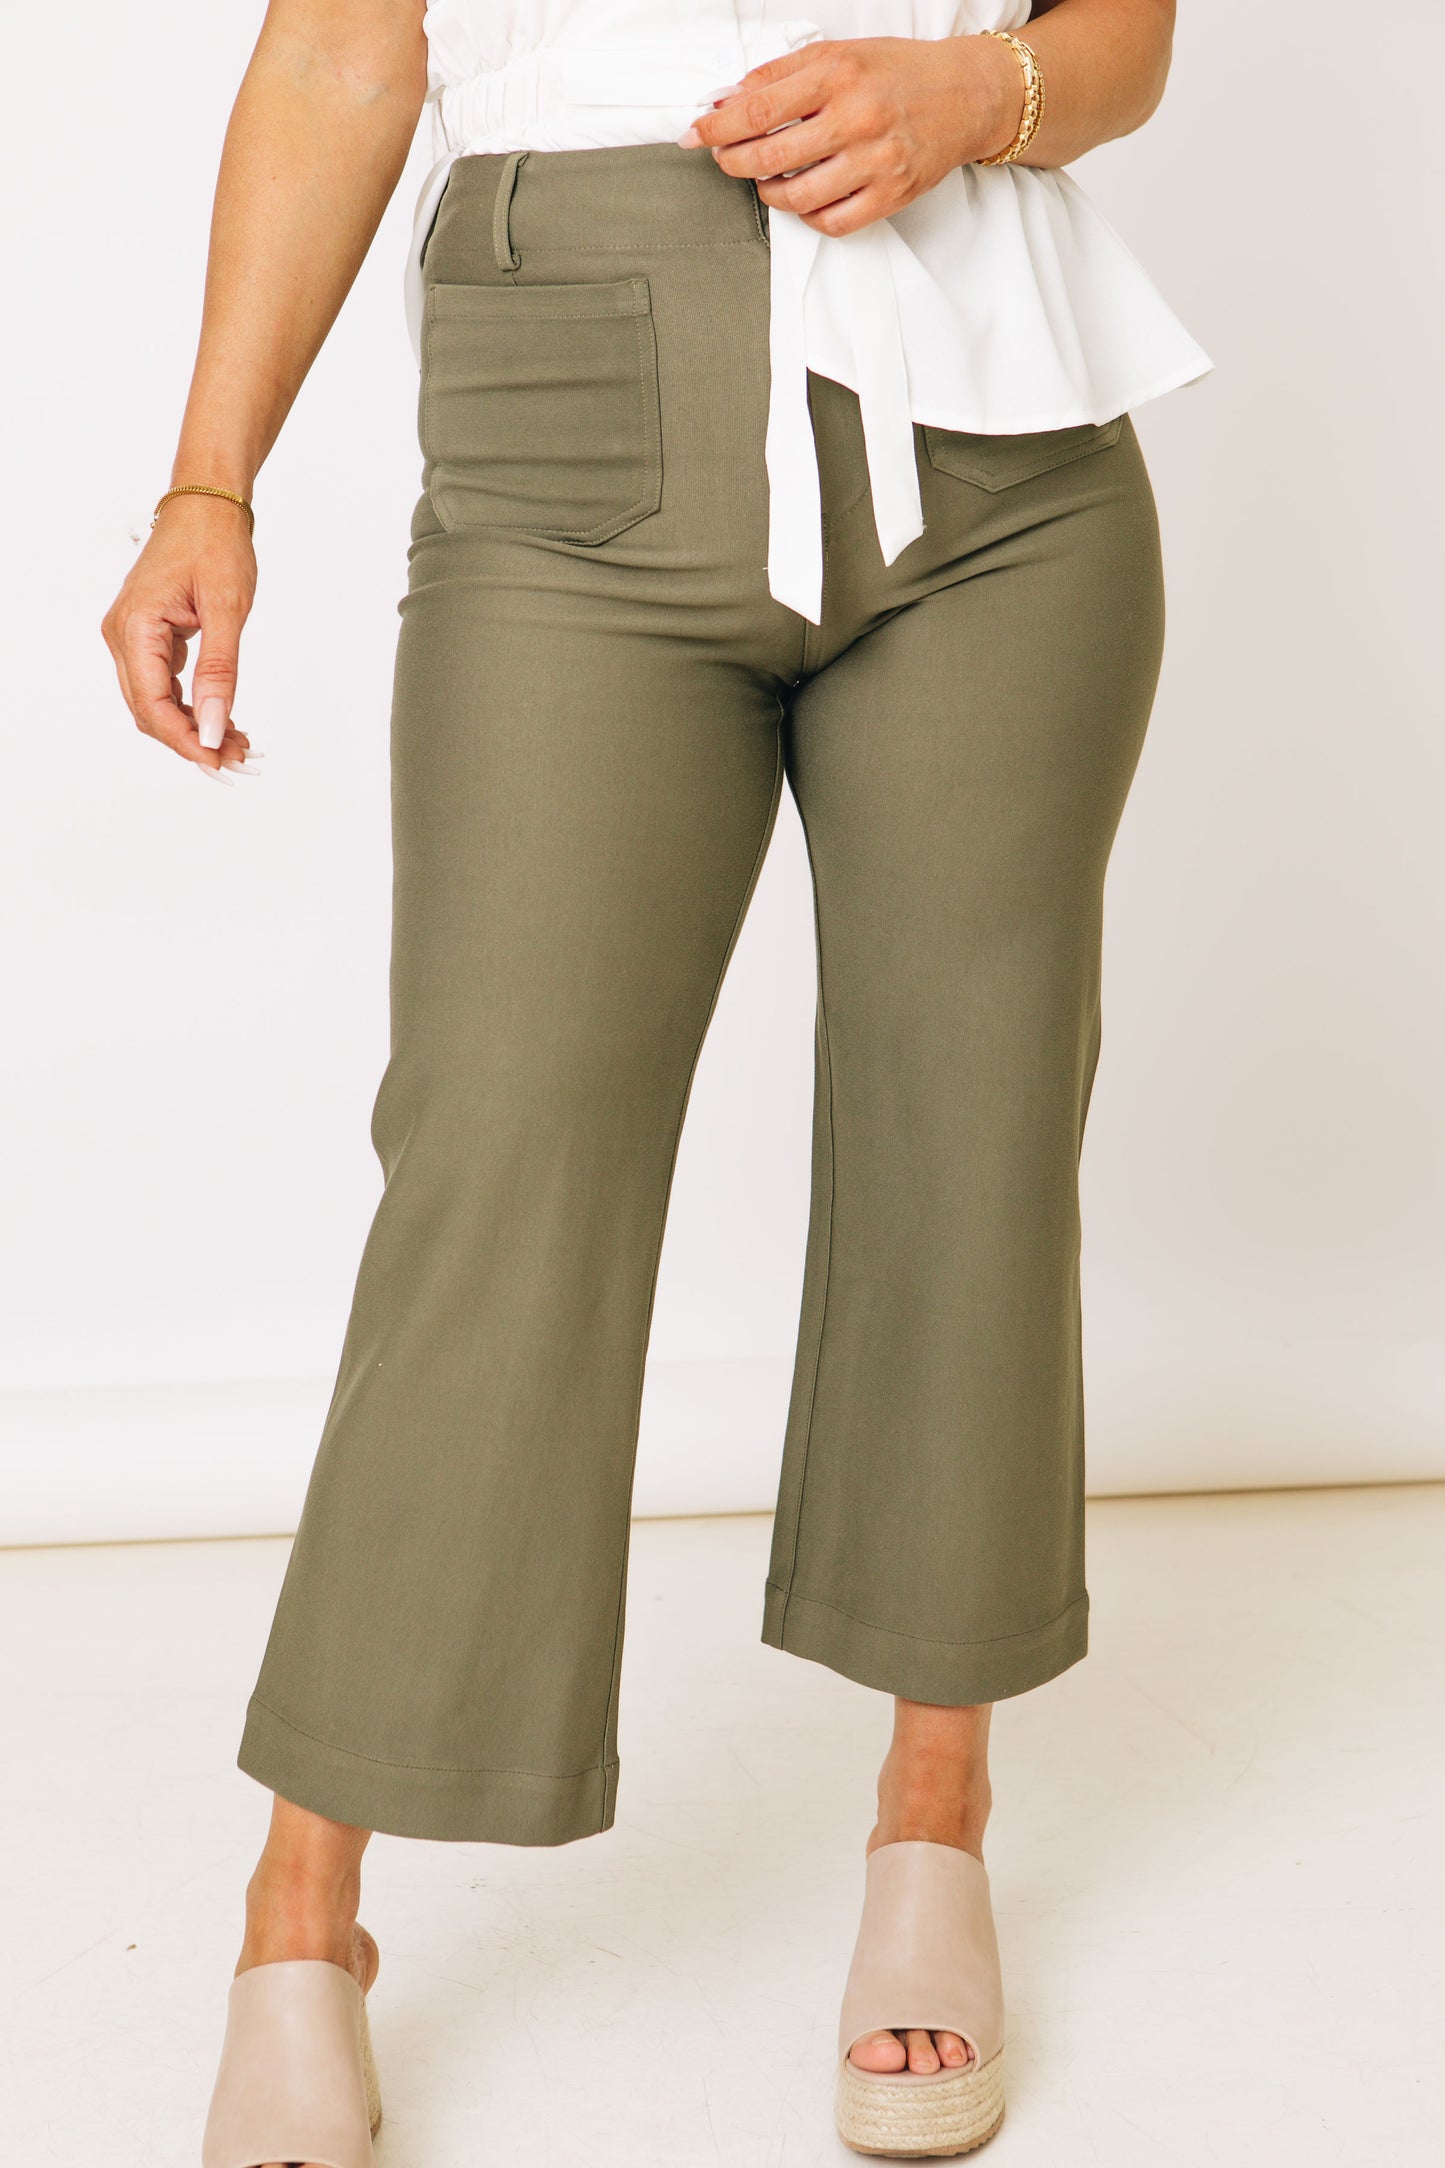 Super Stretch Knit Pants with Pocket on the Front (S-L)